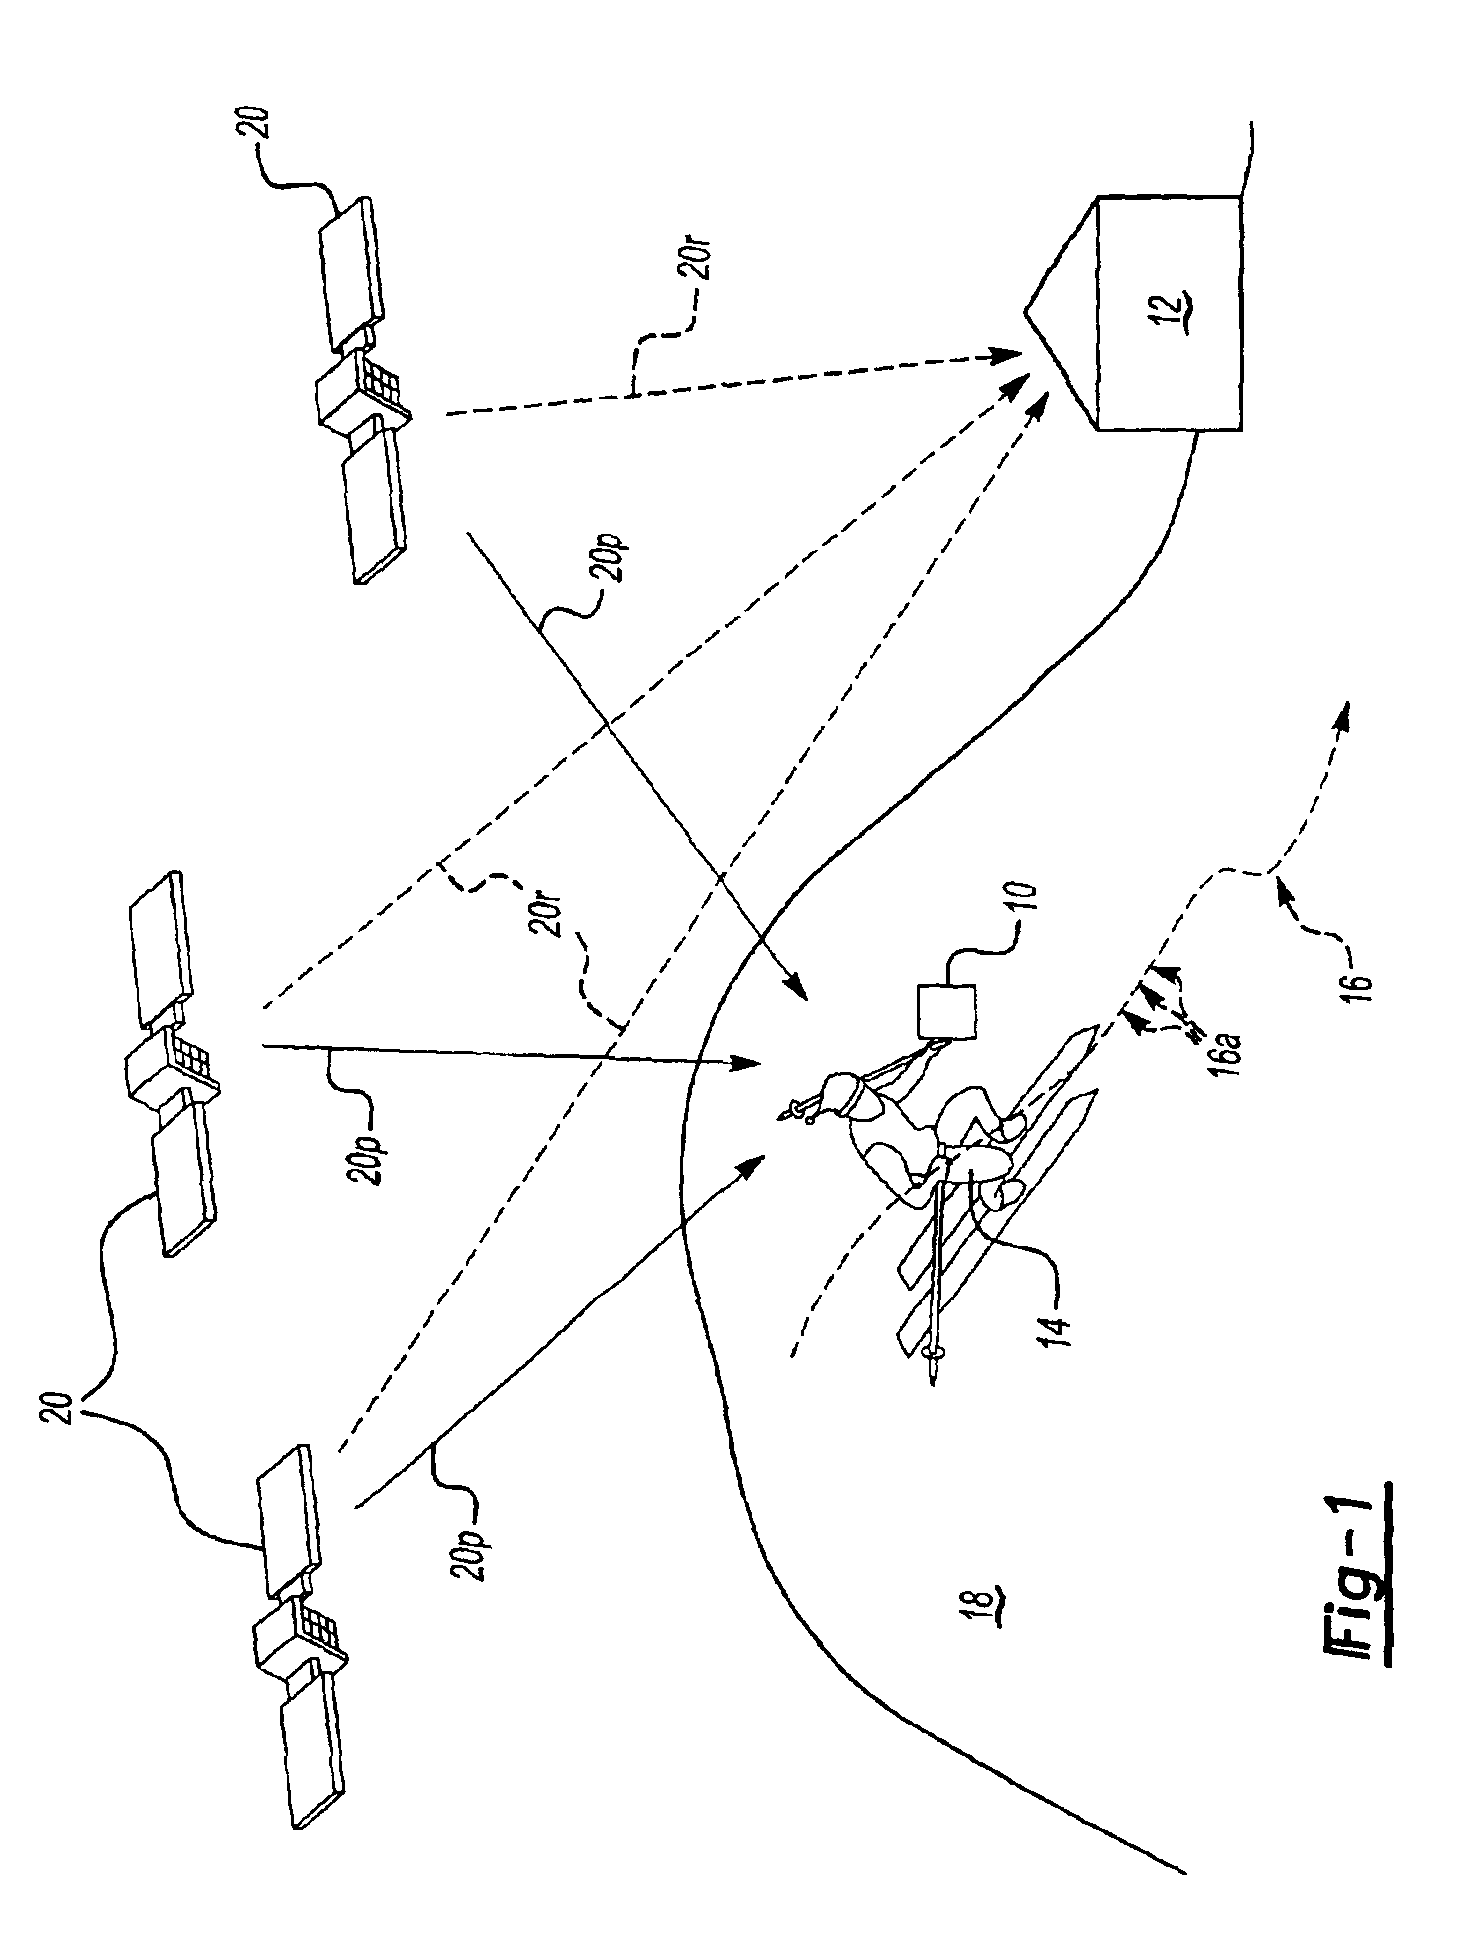 Method and apparatus for recording and synthesizing position data